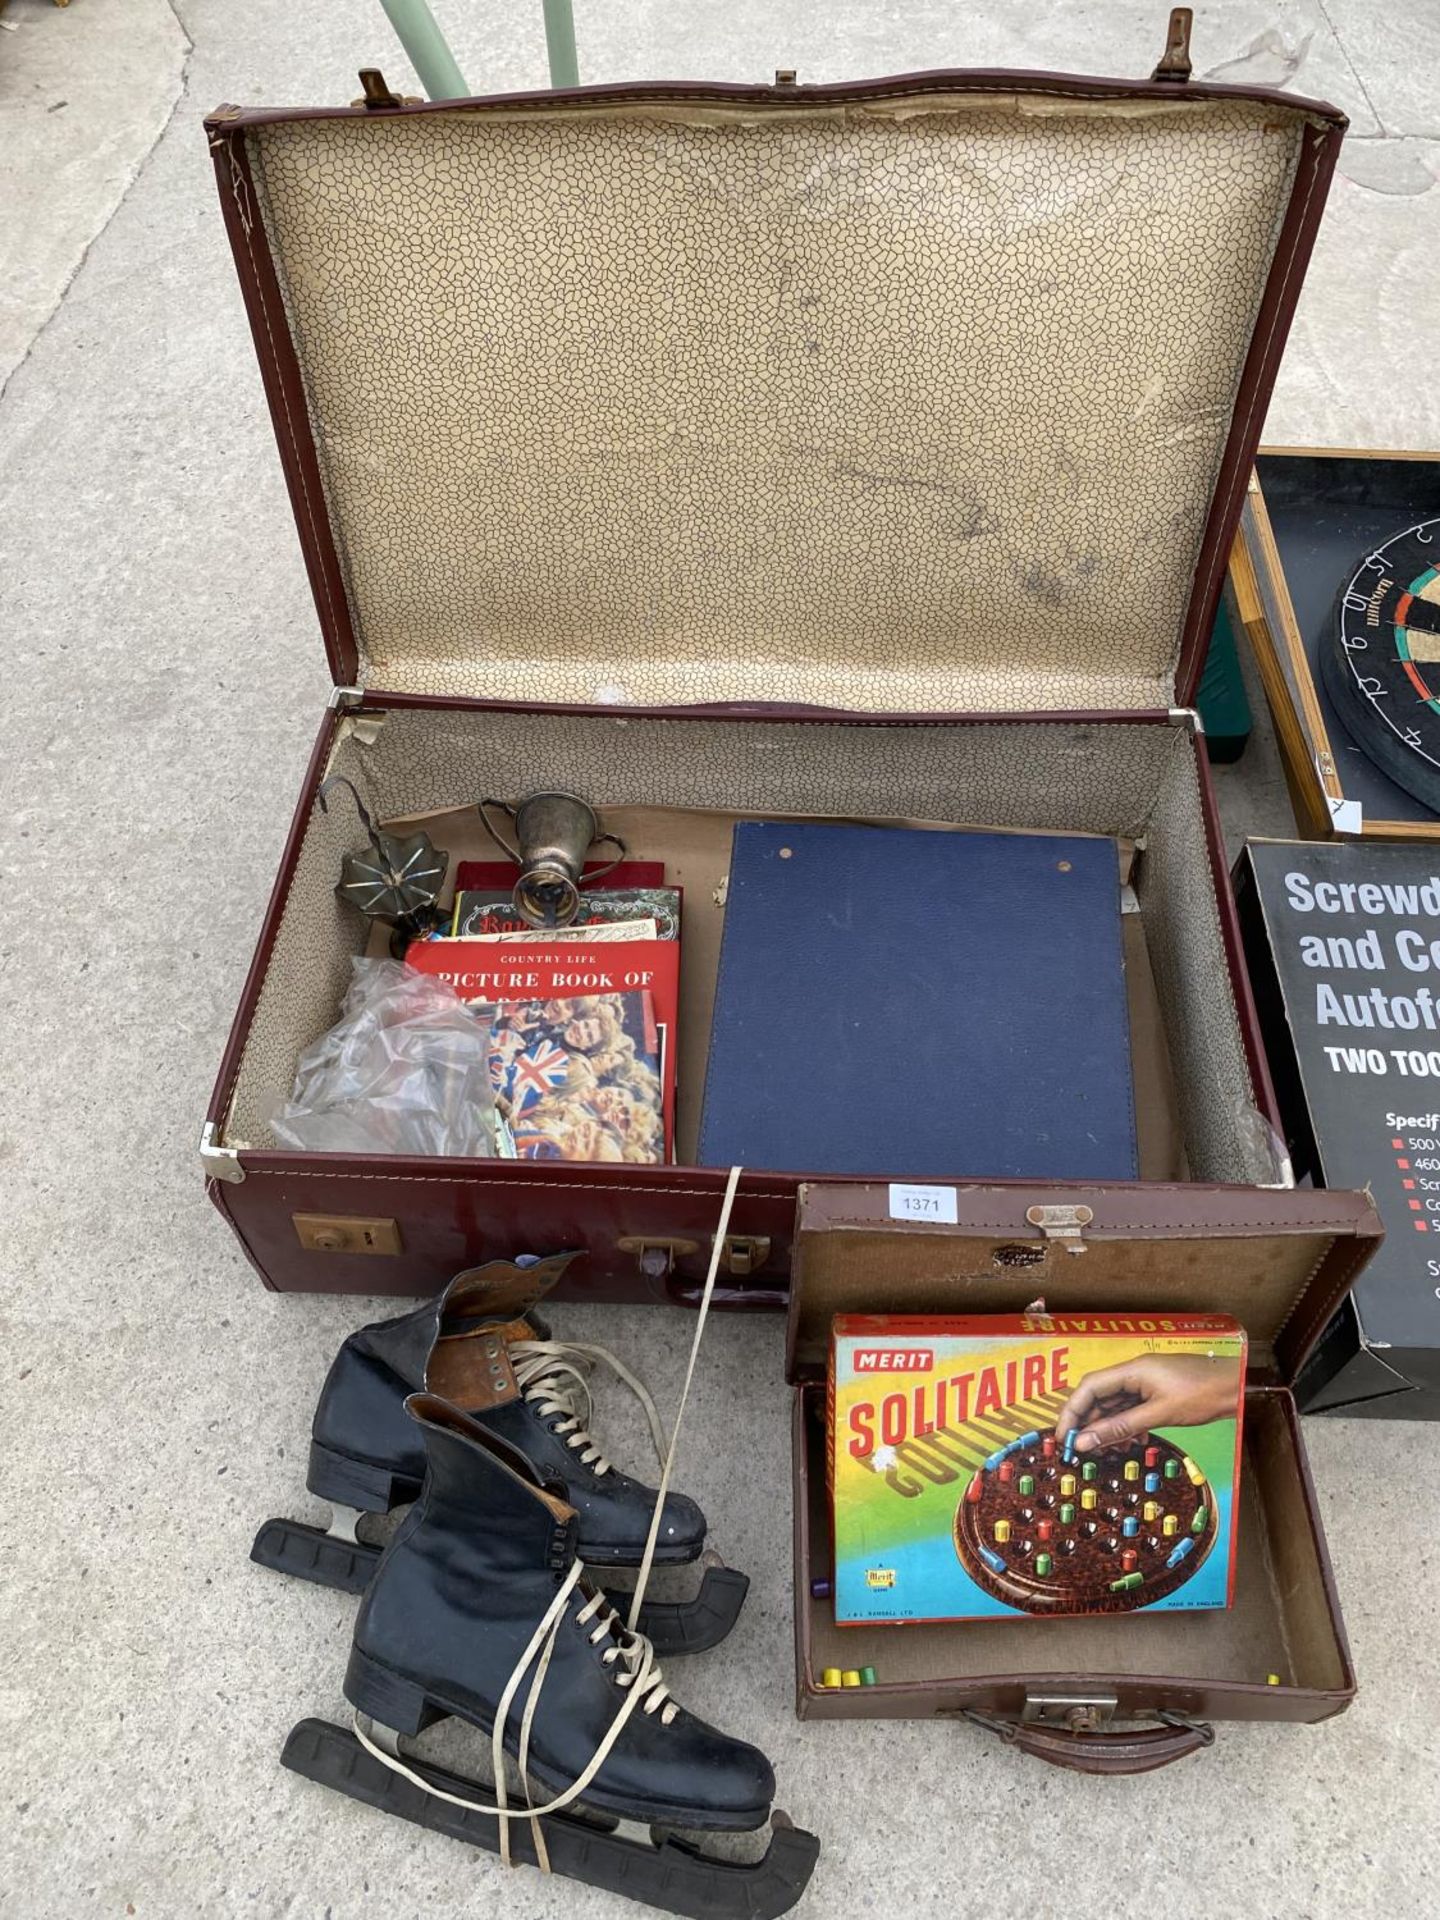 A LARGE ASSORTMENT OF VINTAGE ITEMS TO INCLUDE ICE SKATES, AN EPNS TROPHY AND BOOKS ETC